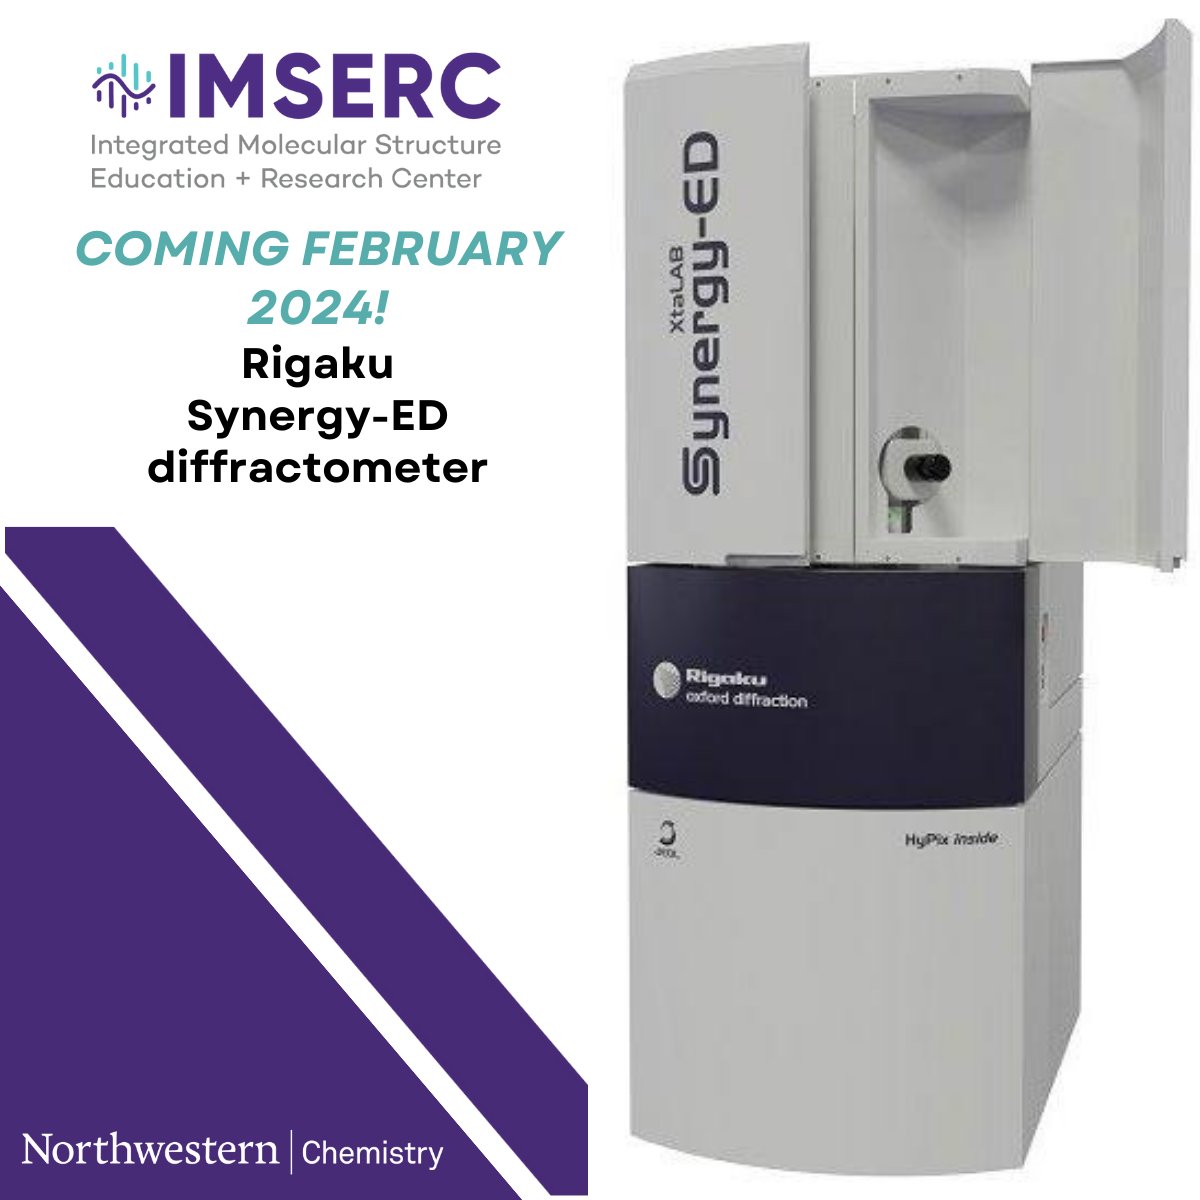 IMSERC will soon house the groundbreaking @Rigaku Synergy-ED diffractometer! Once installed on February 5th, @NUChemistry will be the first academic site in the USA with this cutting-edge technology. #crystallography #electron #diffraction Details ➡️ imserc.northwestern.edu/crystallograph…